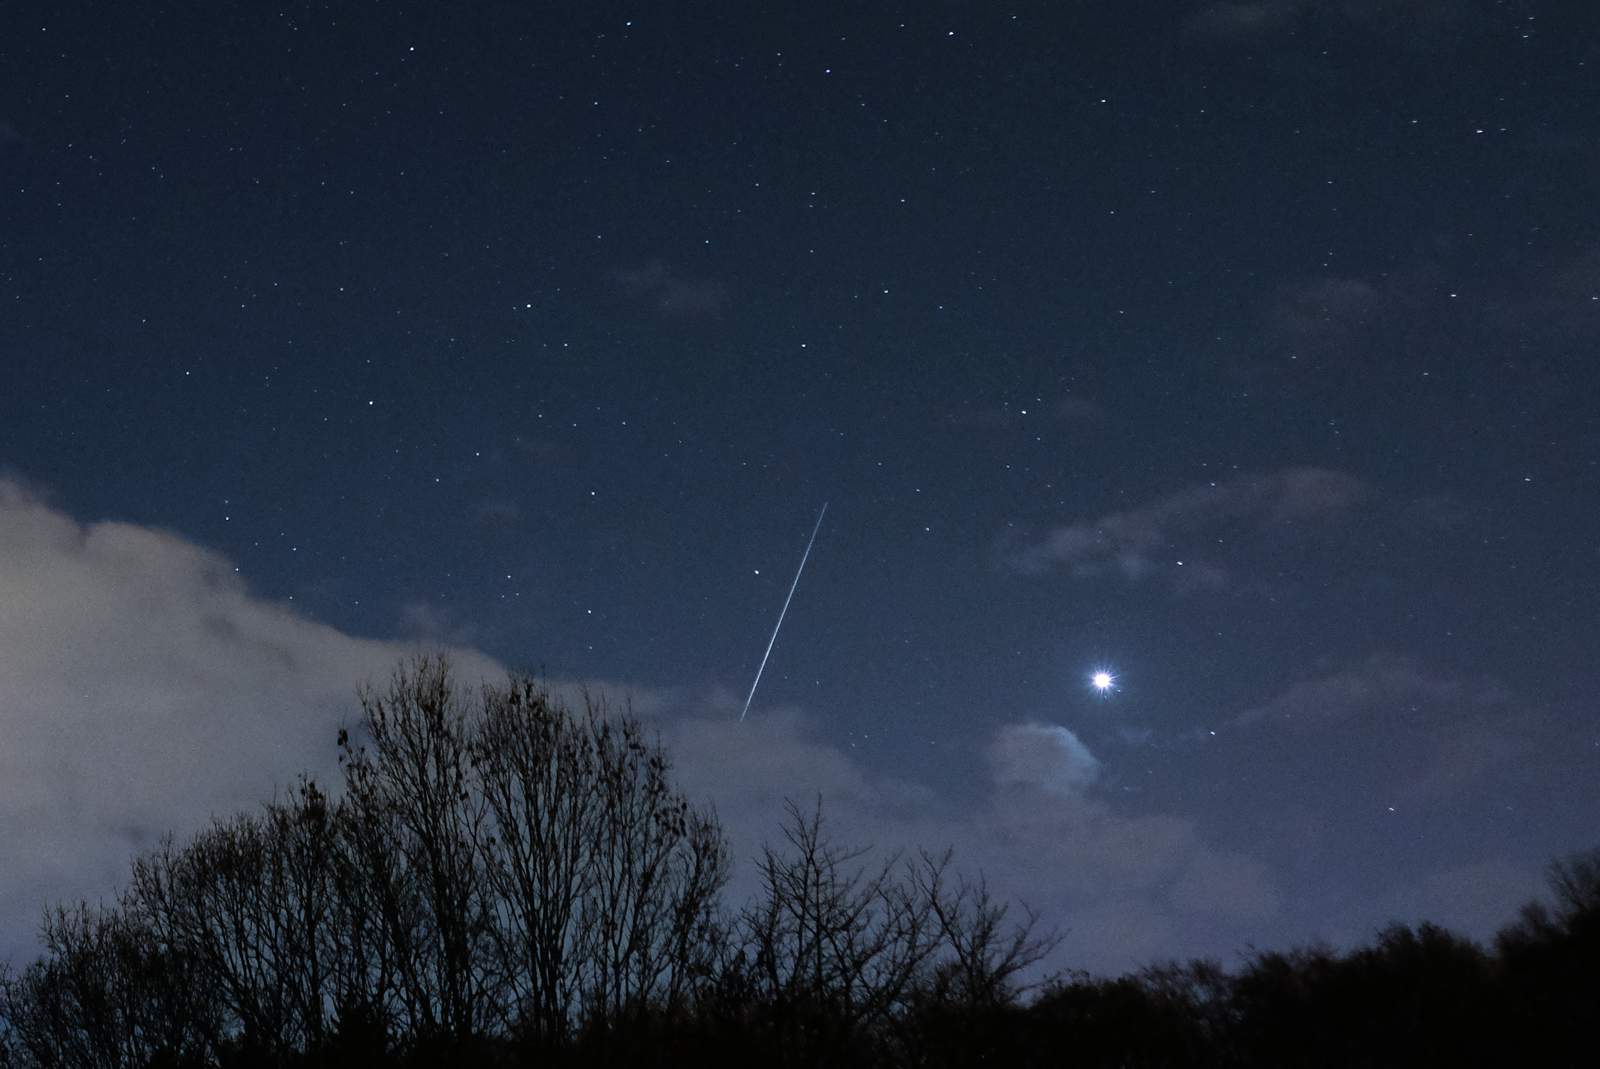 Your best bet for catching a breathtaking glimpse of the Leonid meteor shower this month